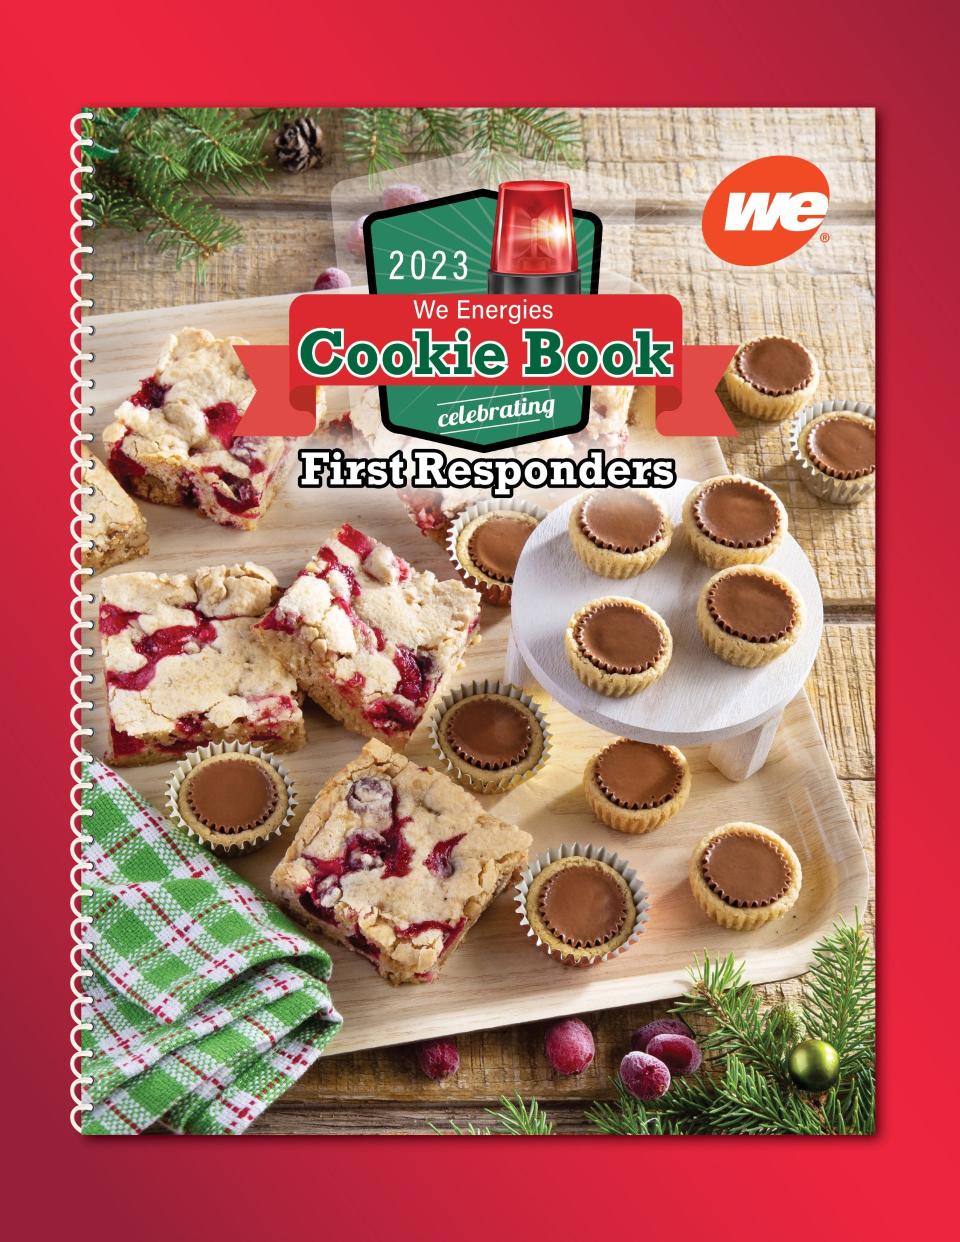 The 2023 We Energies Cookie Book features recipes from police, firefighters and EMTs.